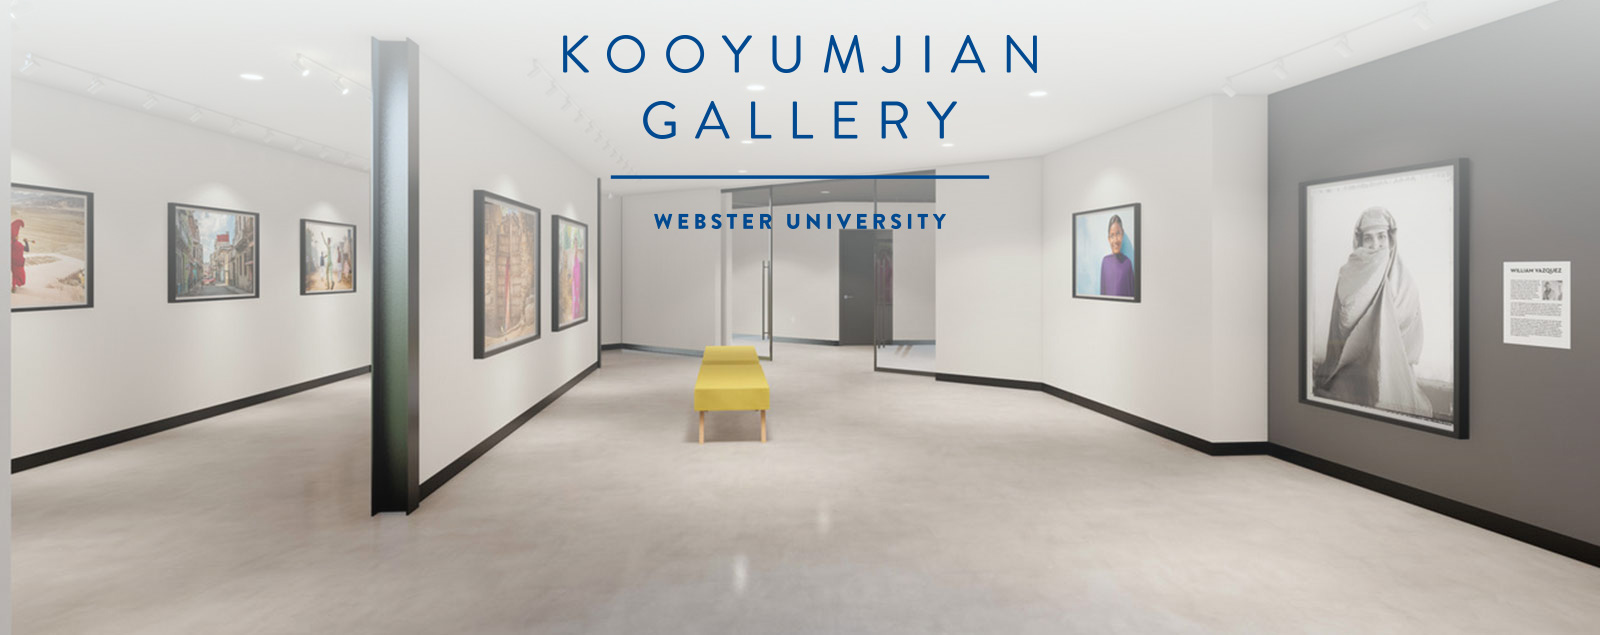 Architectural rendering of the renovated Gallery, showing seating, photo placement, and wood elements.